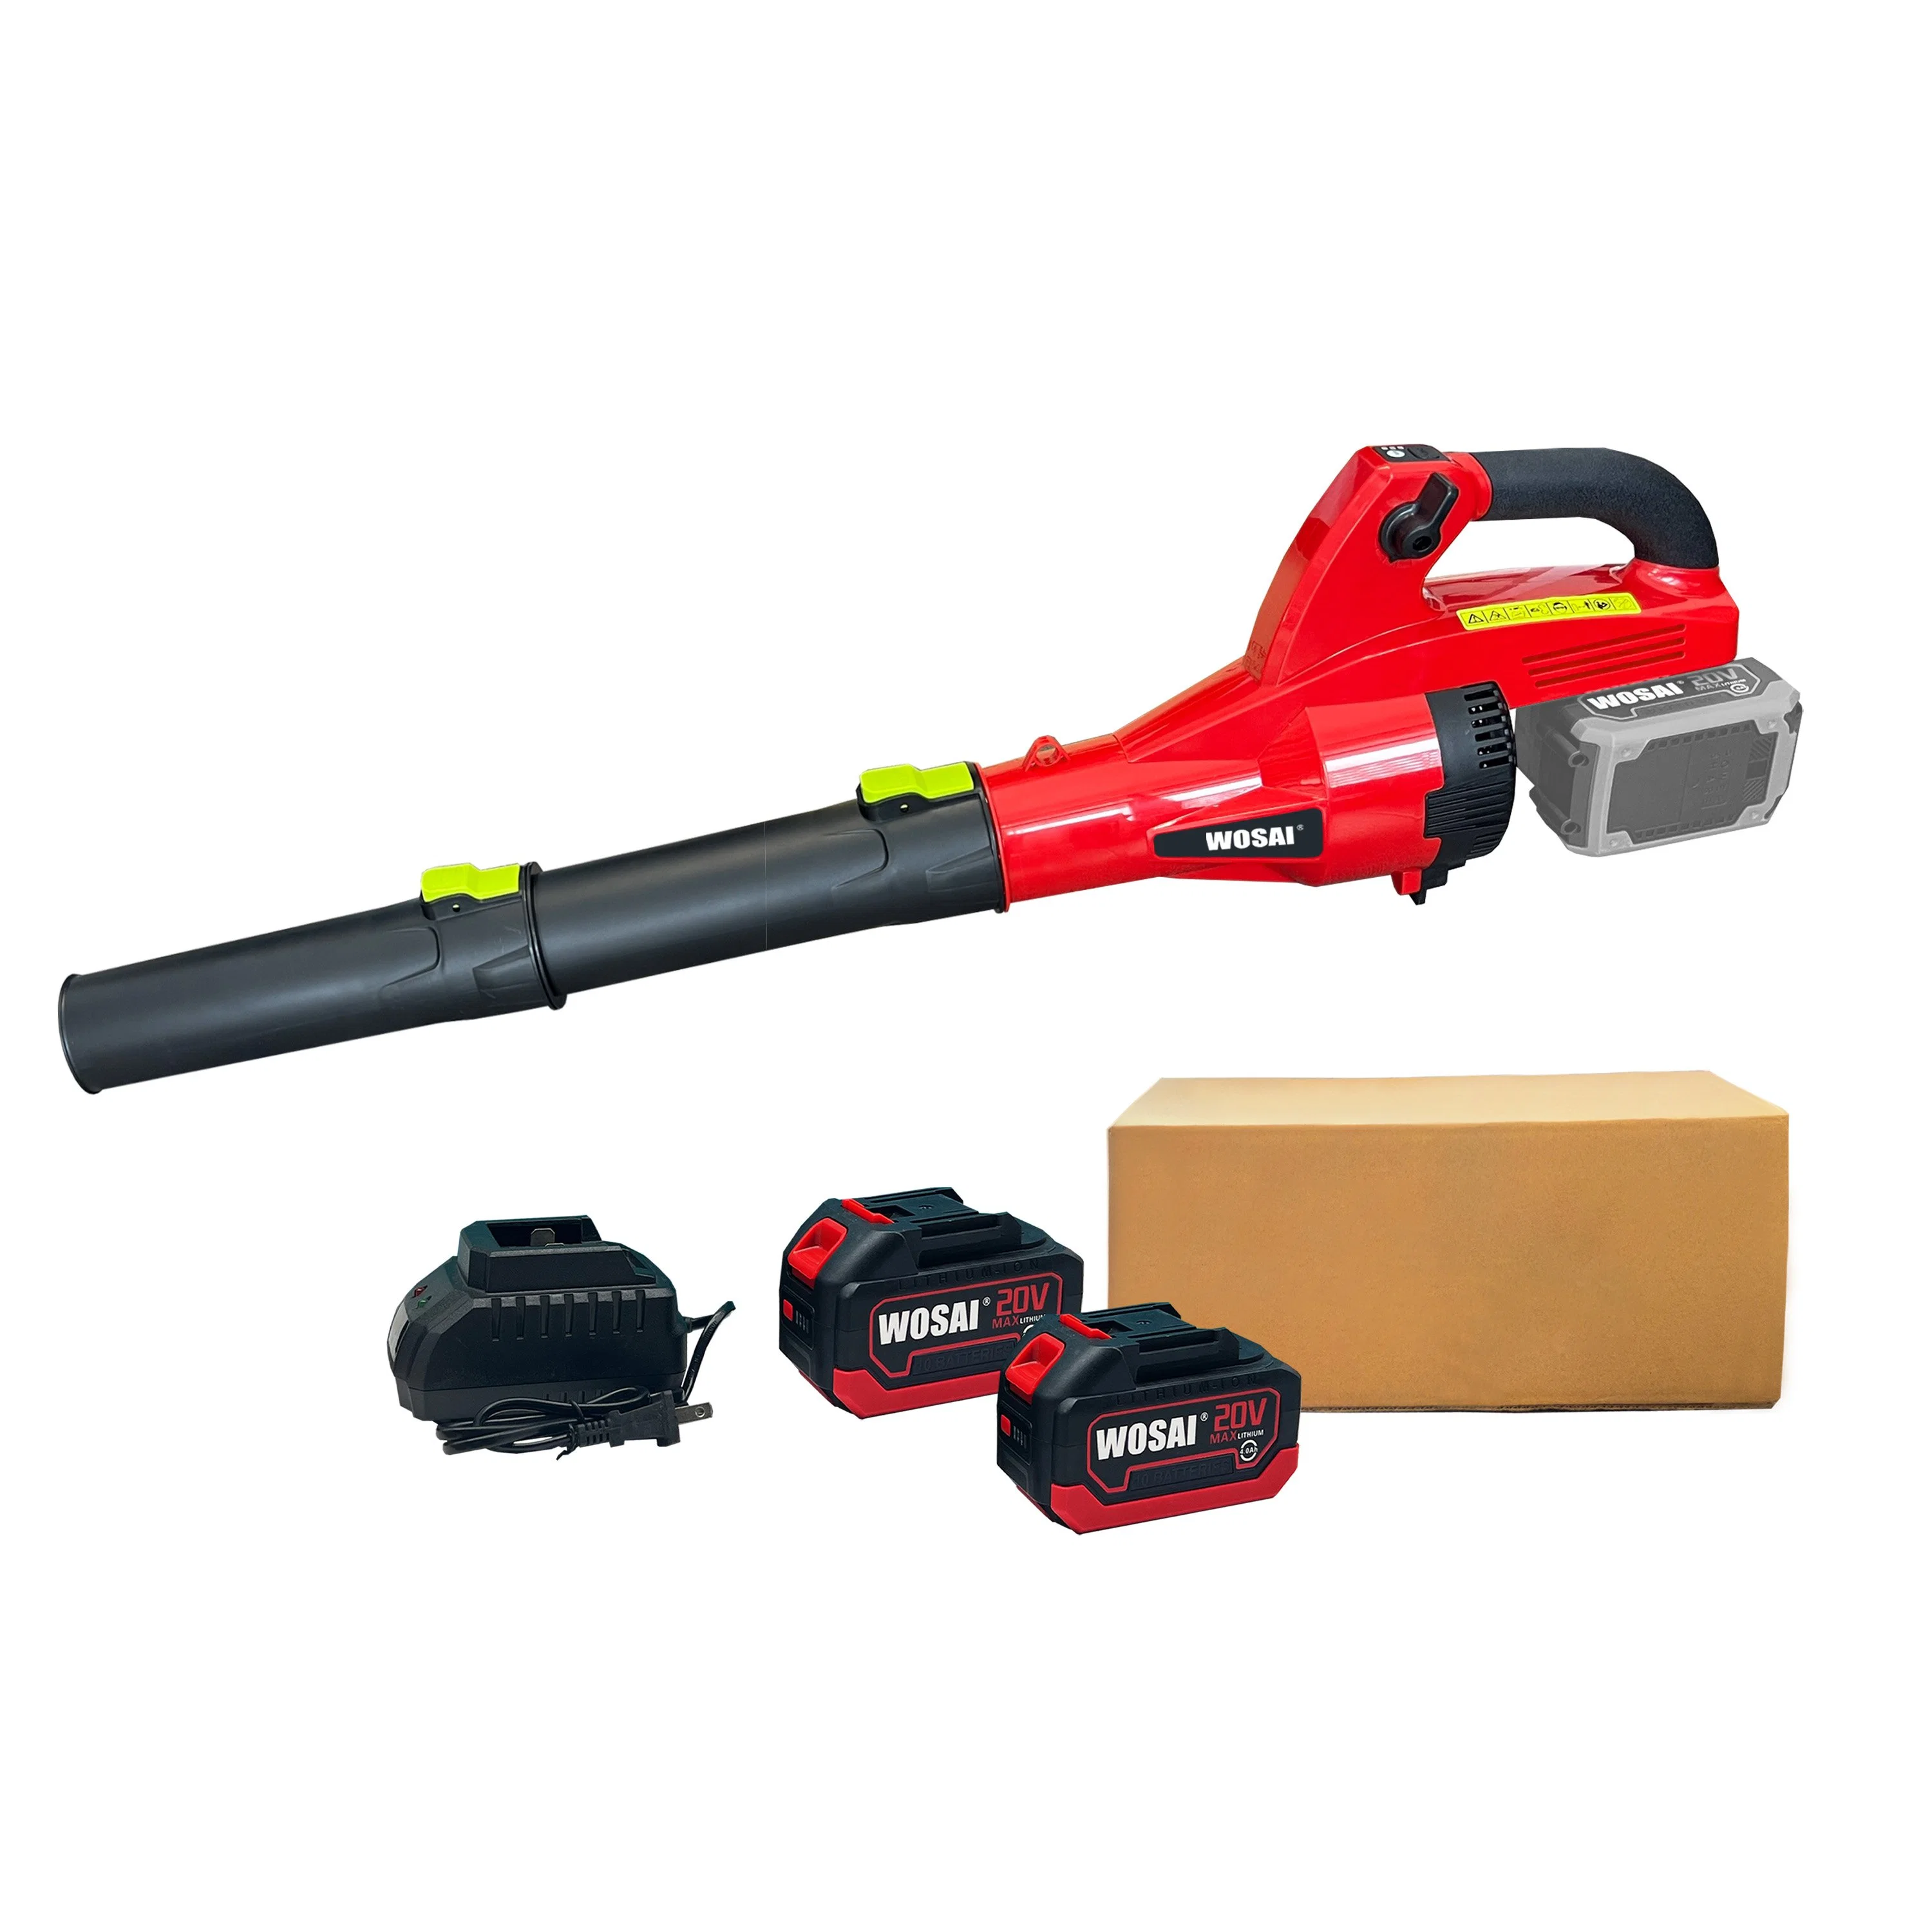 Garden Power Tool Battery Cordless Leaf Blower Brush Blowing and Suction Dual Purpose Storm Machine and Vacuum Cleaner